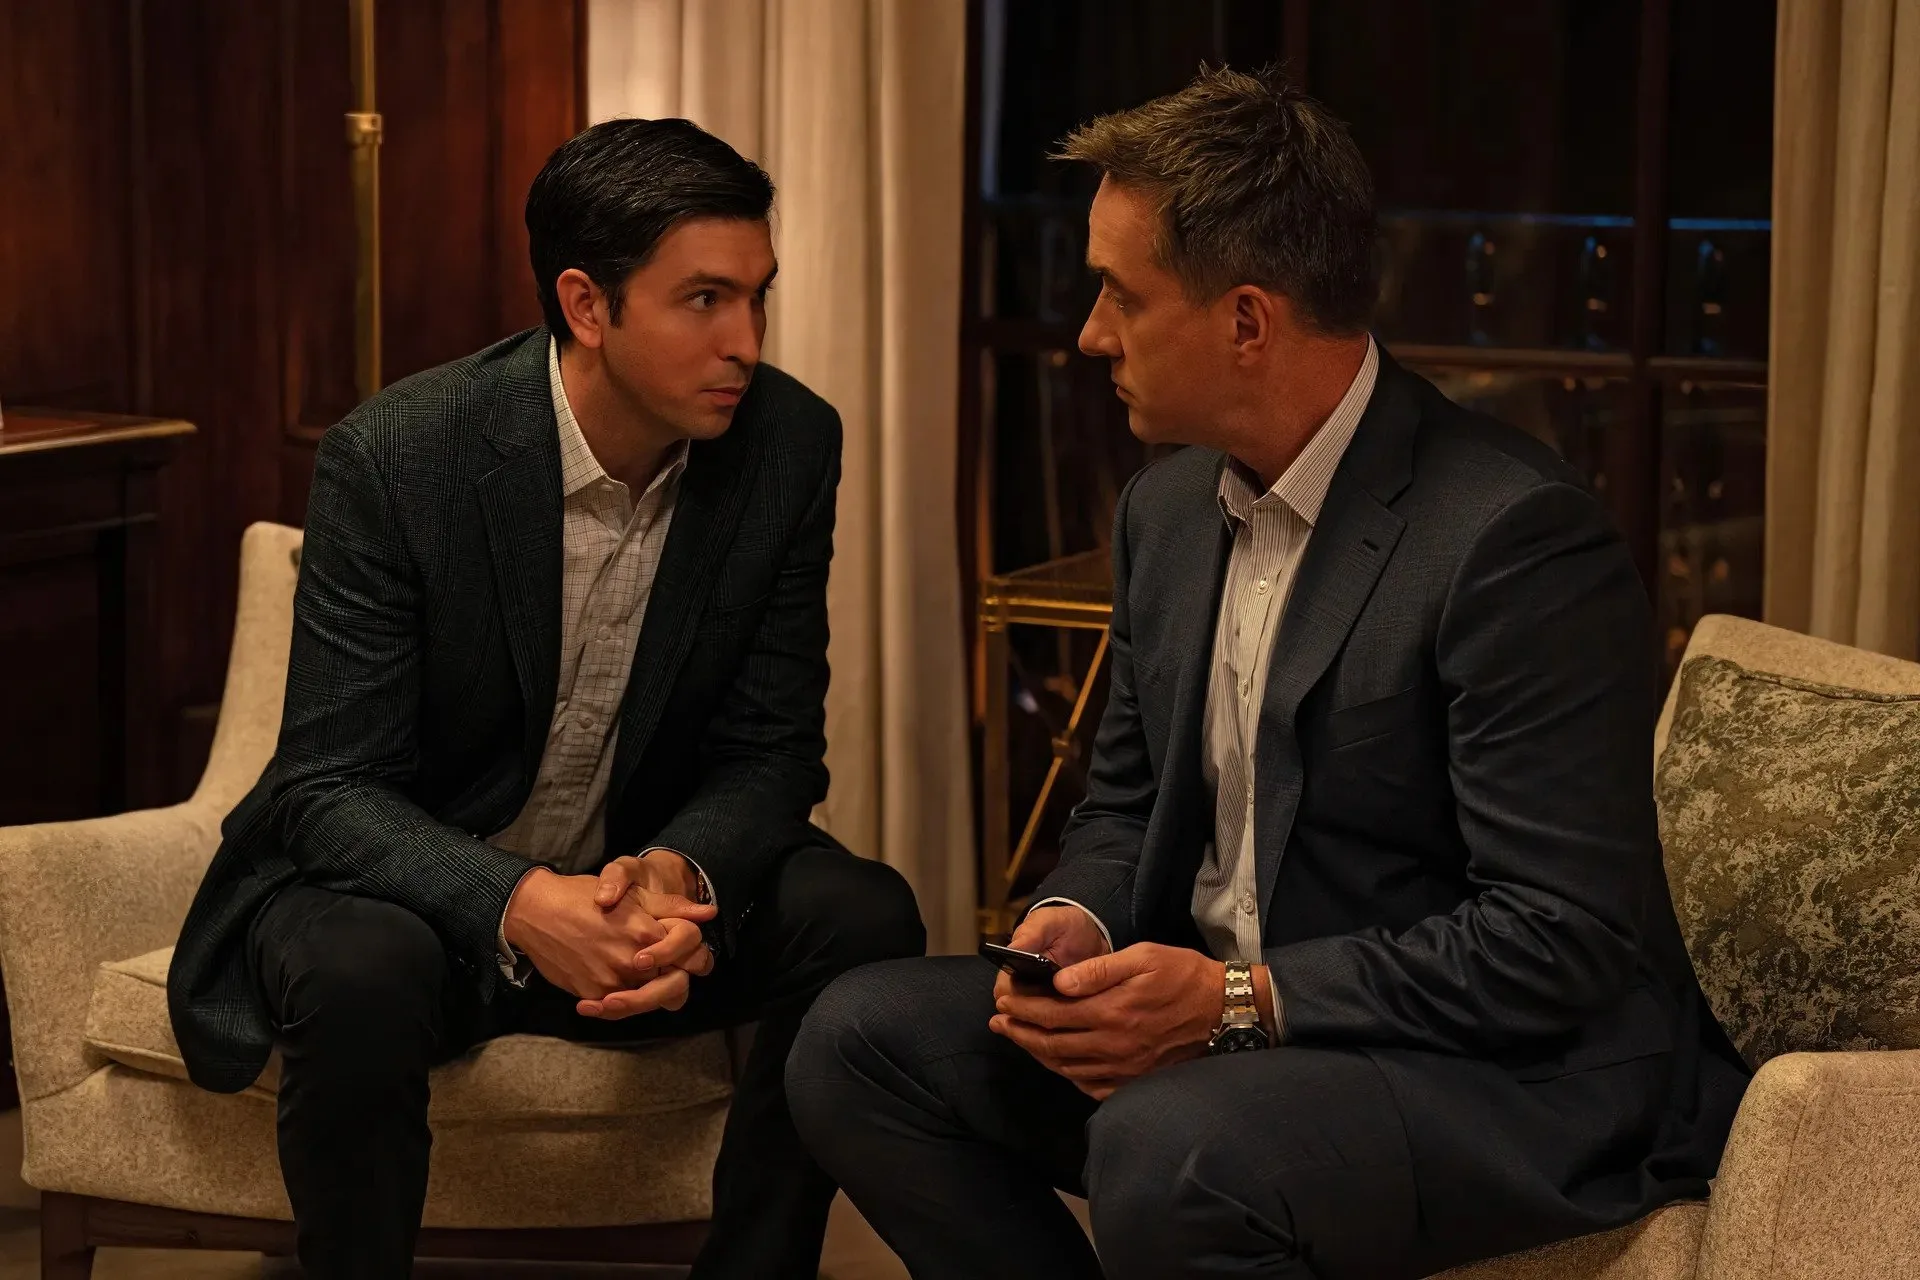 Succession Season 4 Episode 1 Review: “The Munsters” Returns with a Flourish